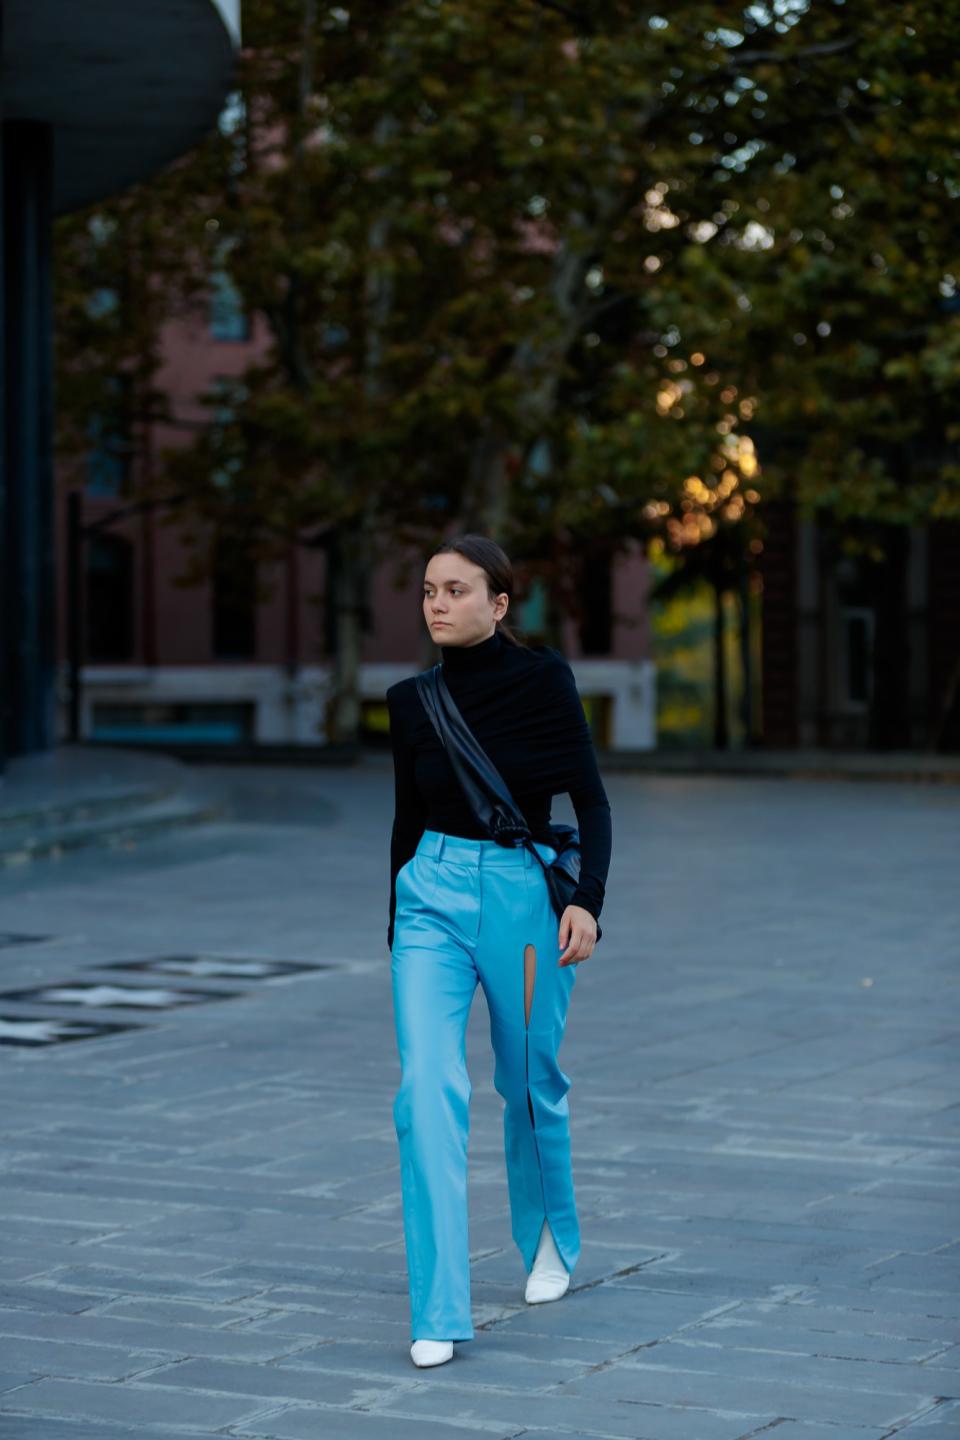 The Best Street Style at Tbilisi Fashion Week 2019